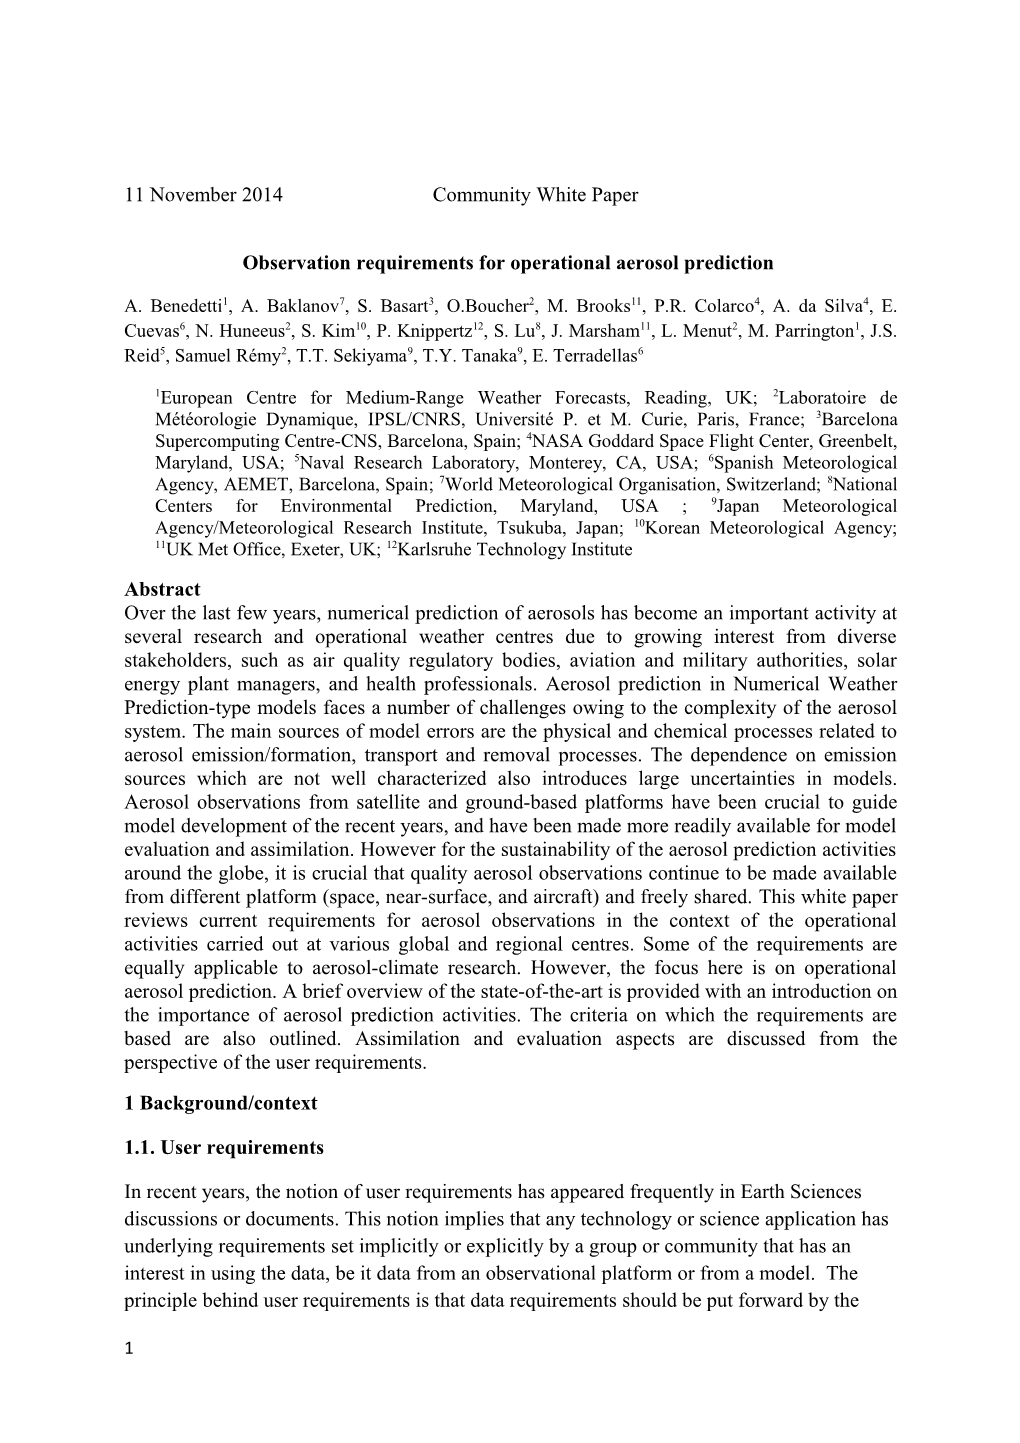 Observation Requirements for Operational Aerosol Prediction